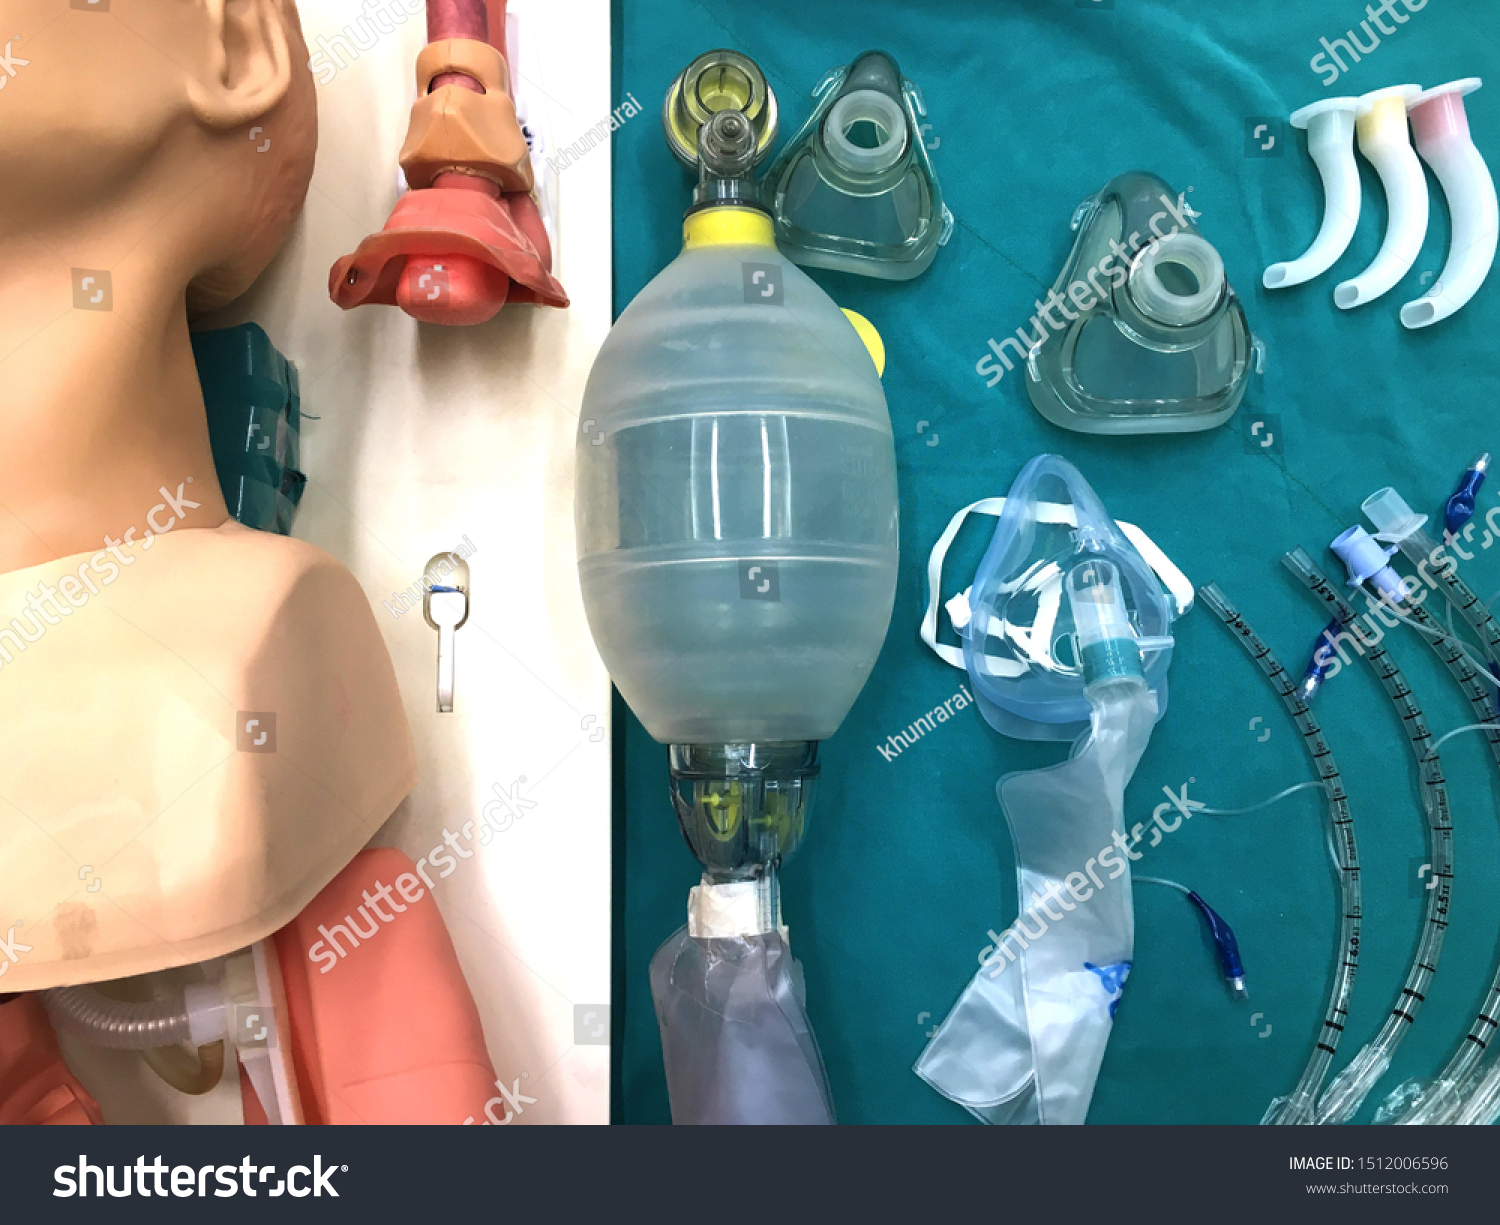 Medical equipment for airway management : model, nasopharyngeal airway, oral airway, mask with bag and endotracheal tube on table #1512006596